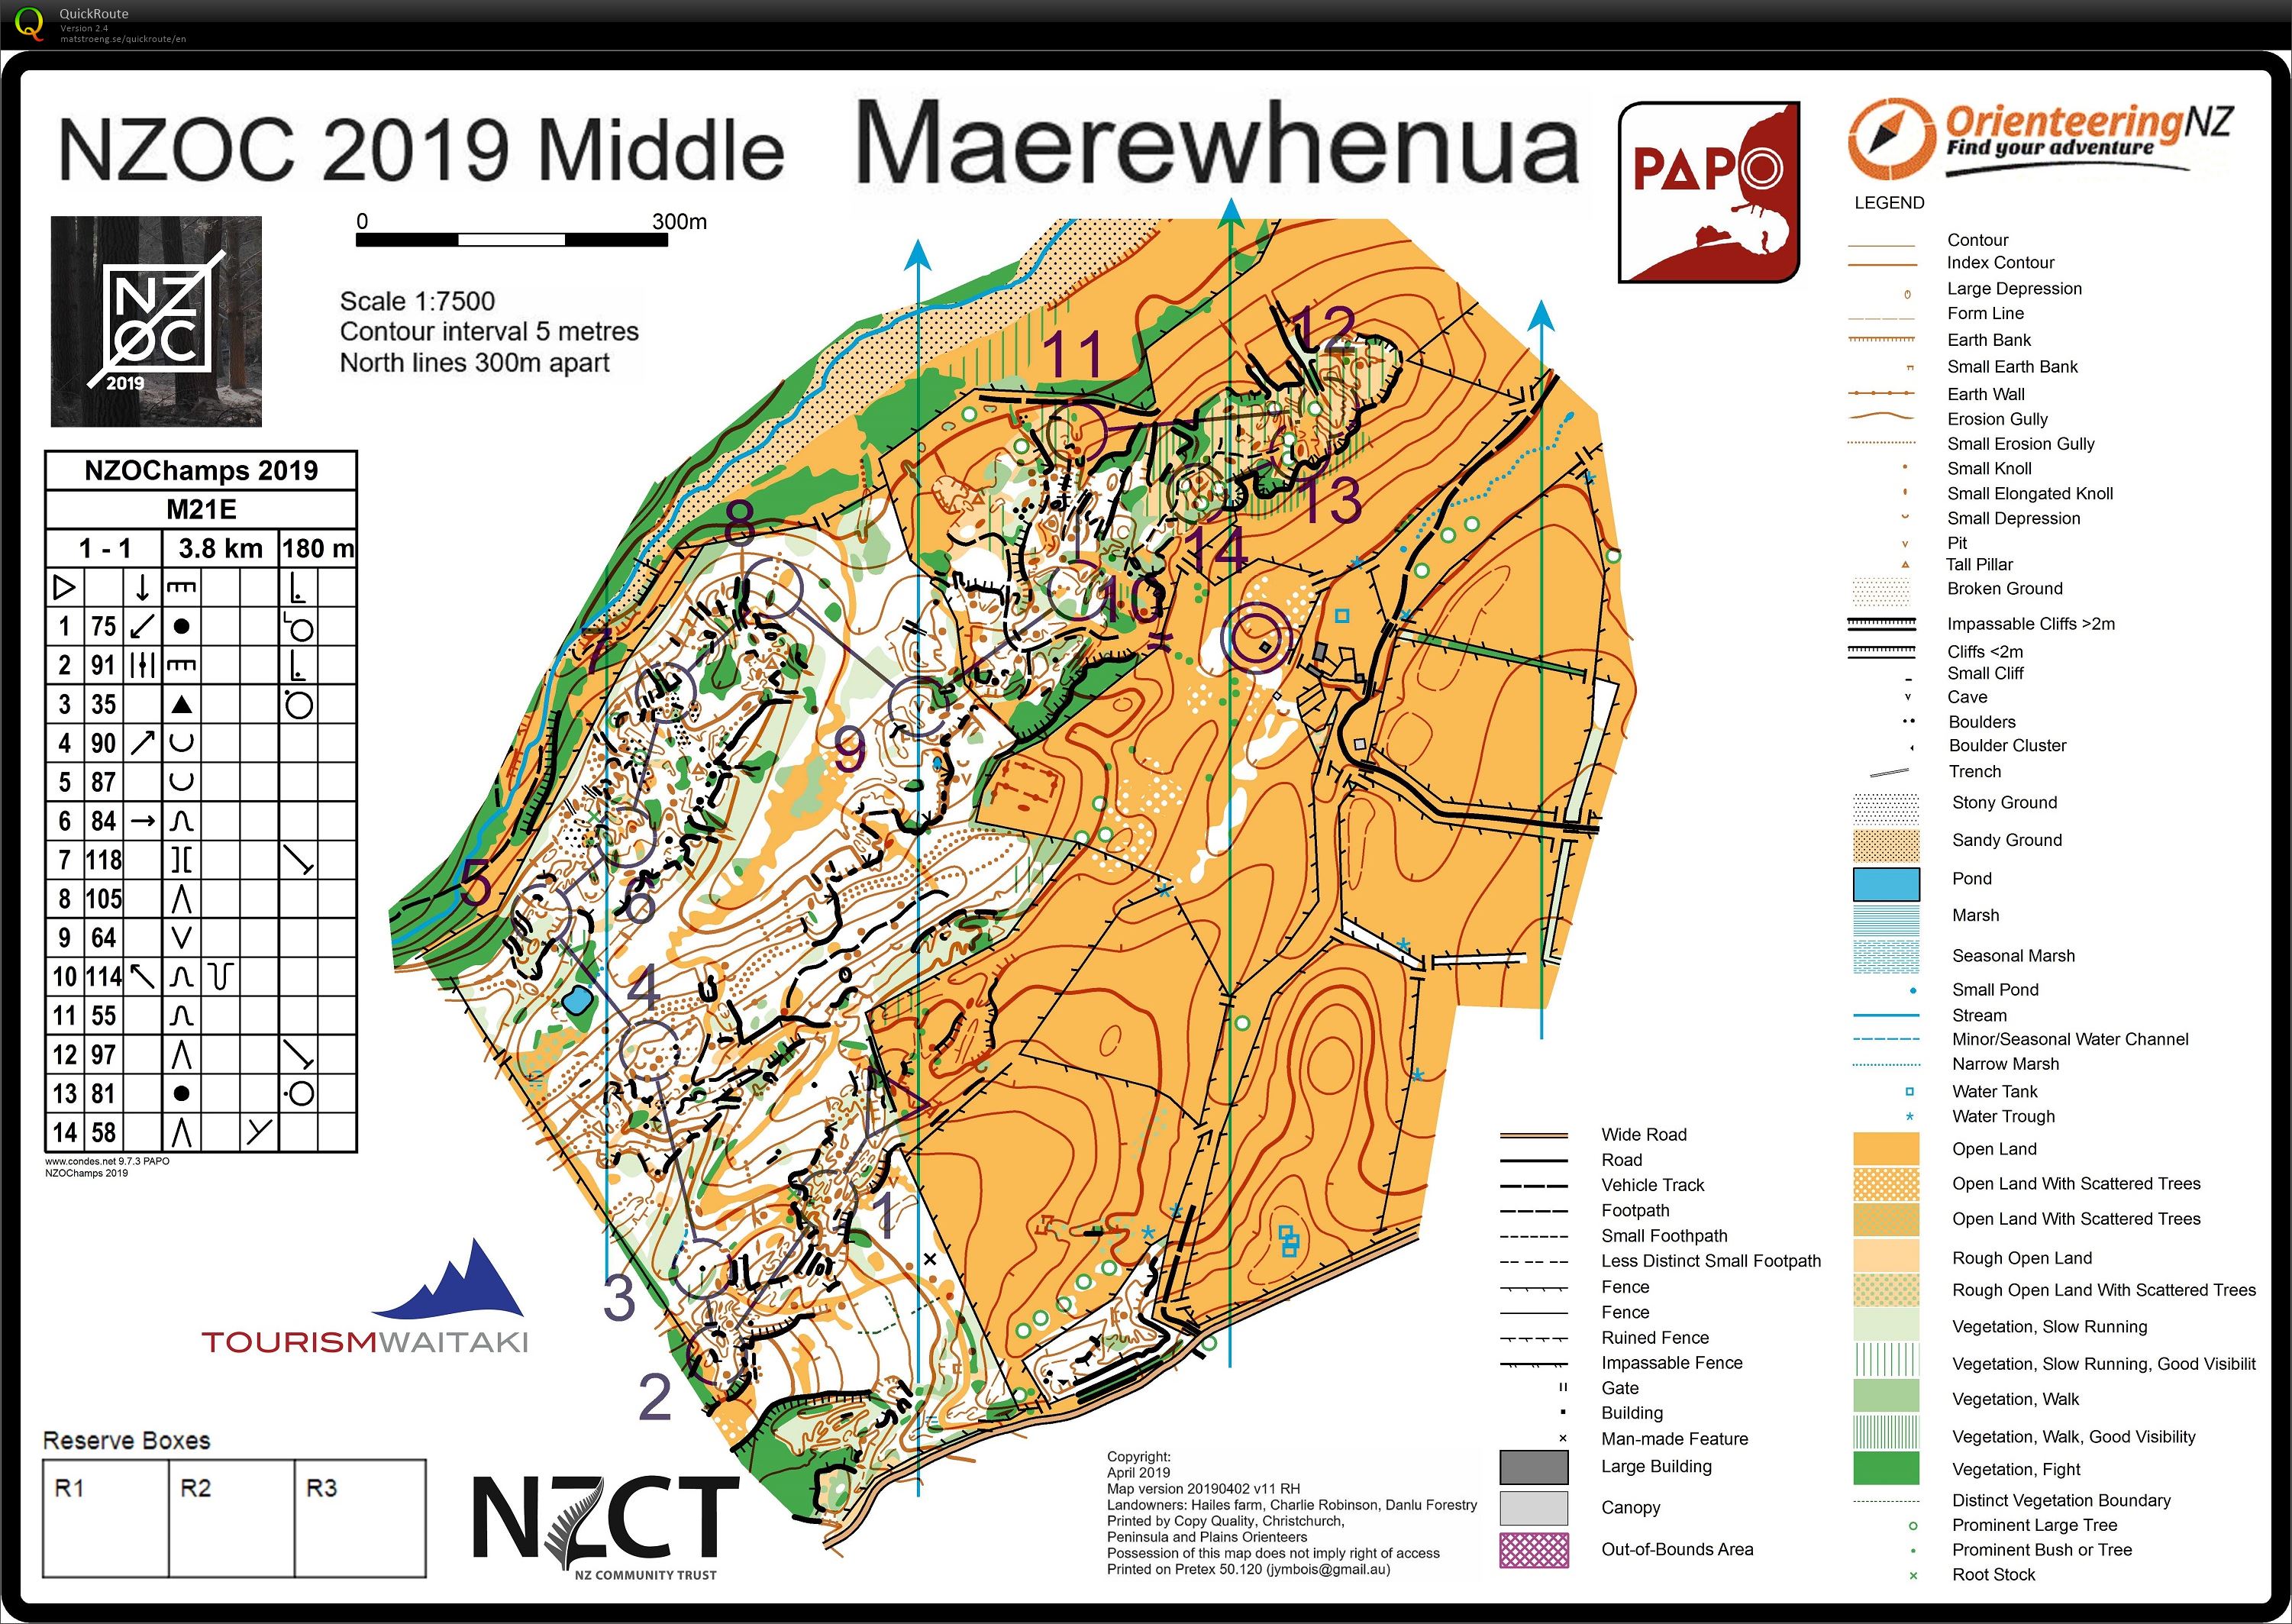 NZ Champs Middle pt 1 (20.04.2019)